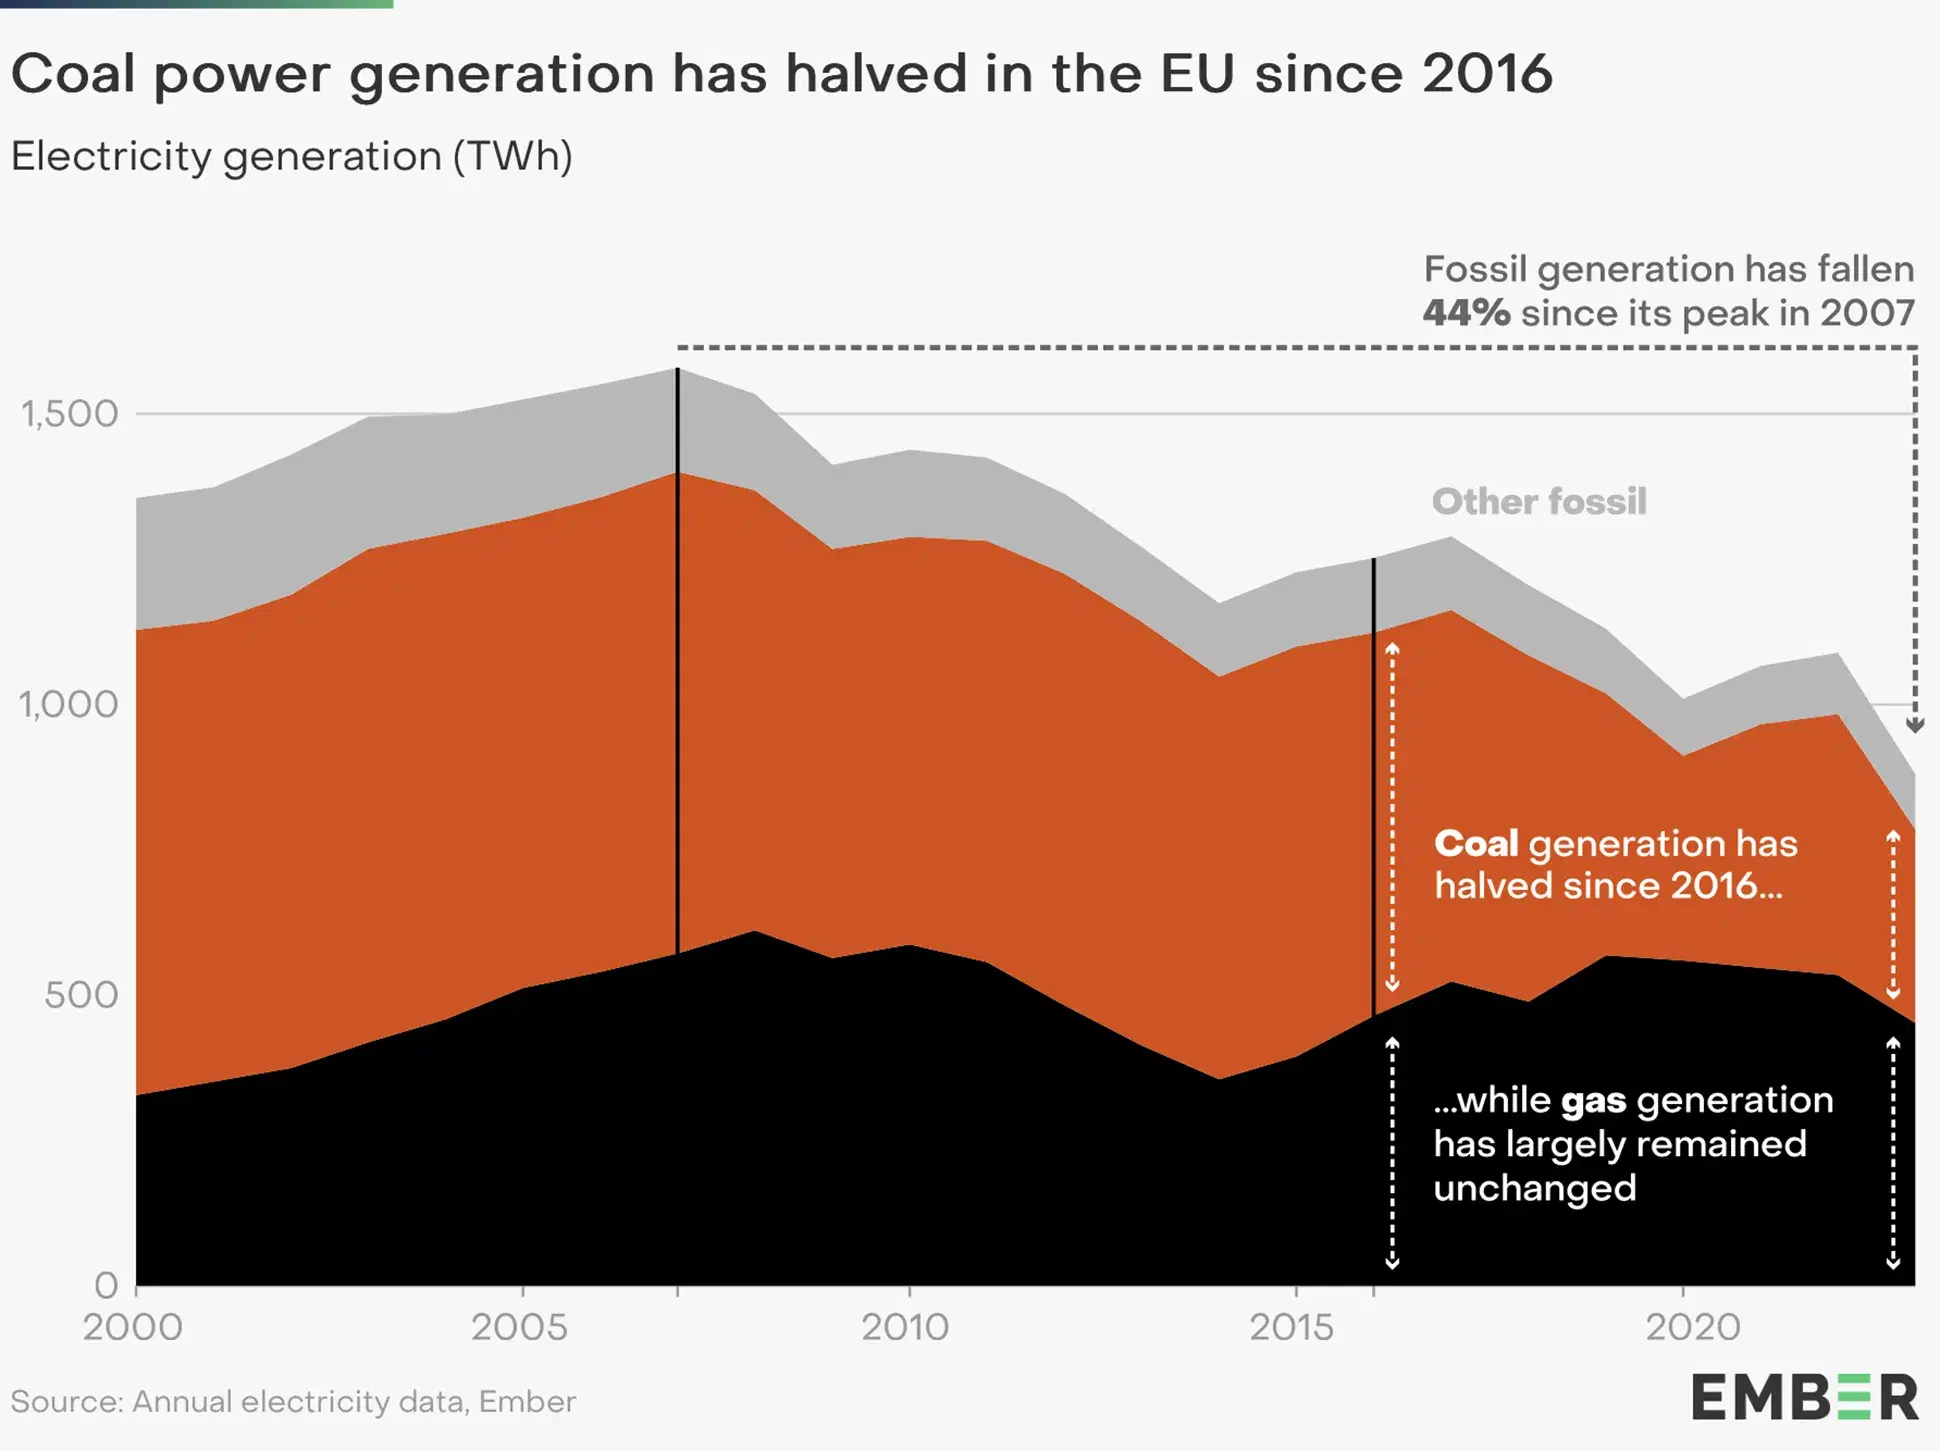 The EU Has Halved Electricity Generation from Coal Compared to 2016